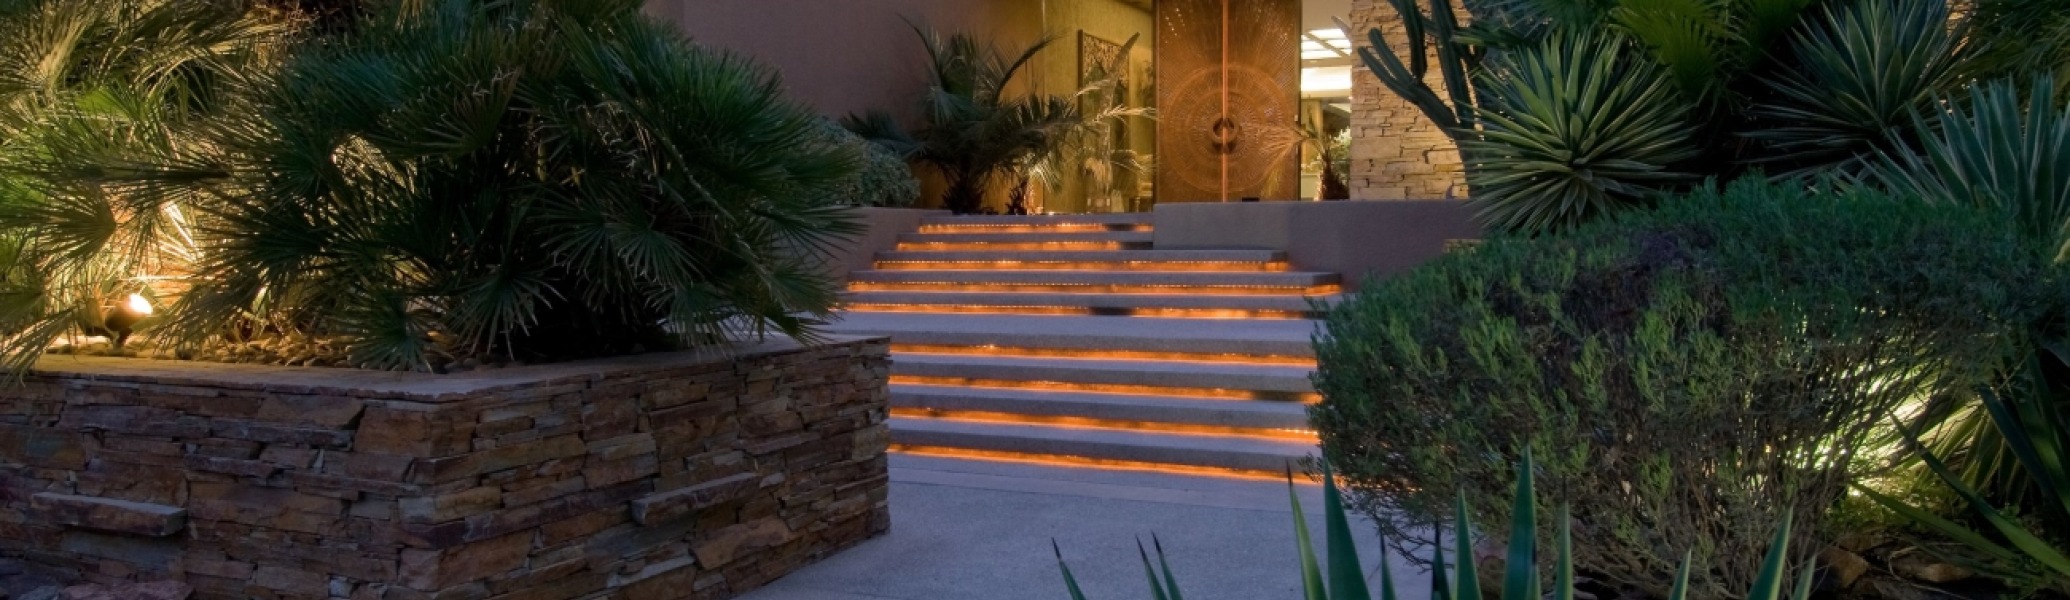 Palm-Springs-Real-Estate-Southern-California-Real-Estate-Rancho-Mirage-Real-Estate15-Evening-Star-1